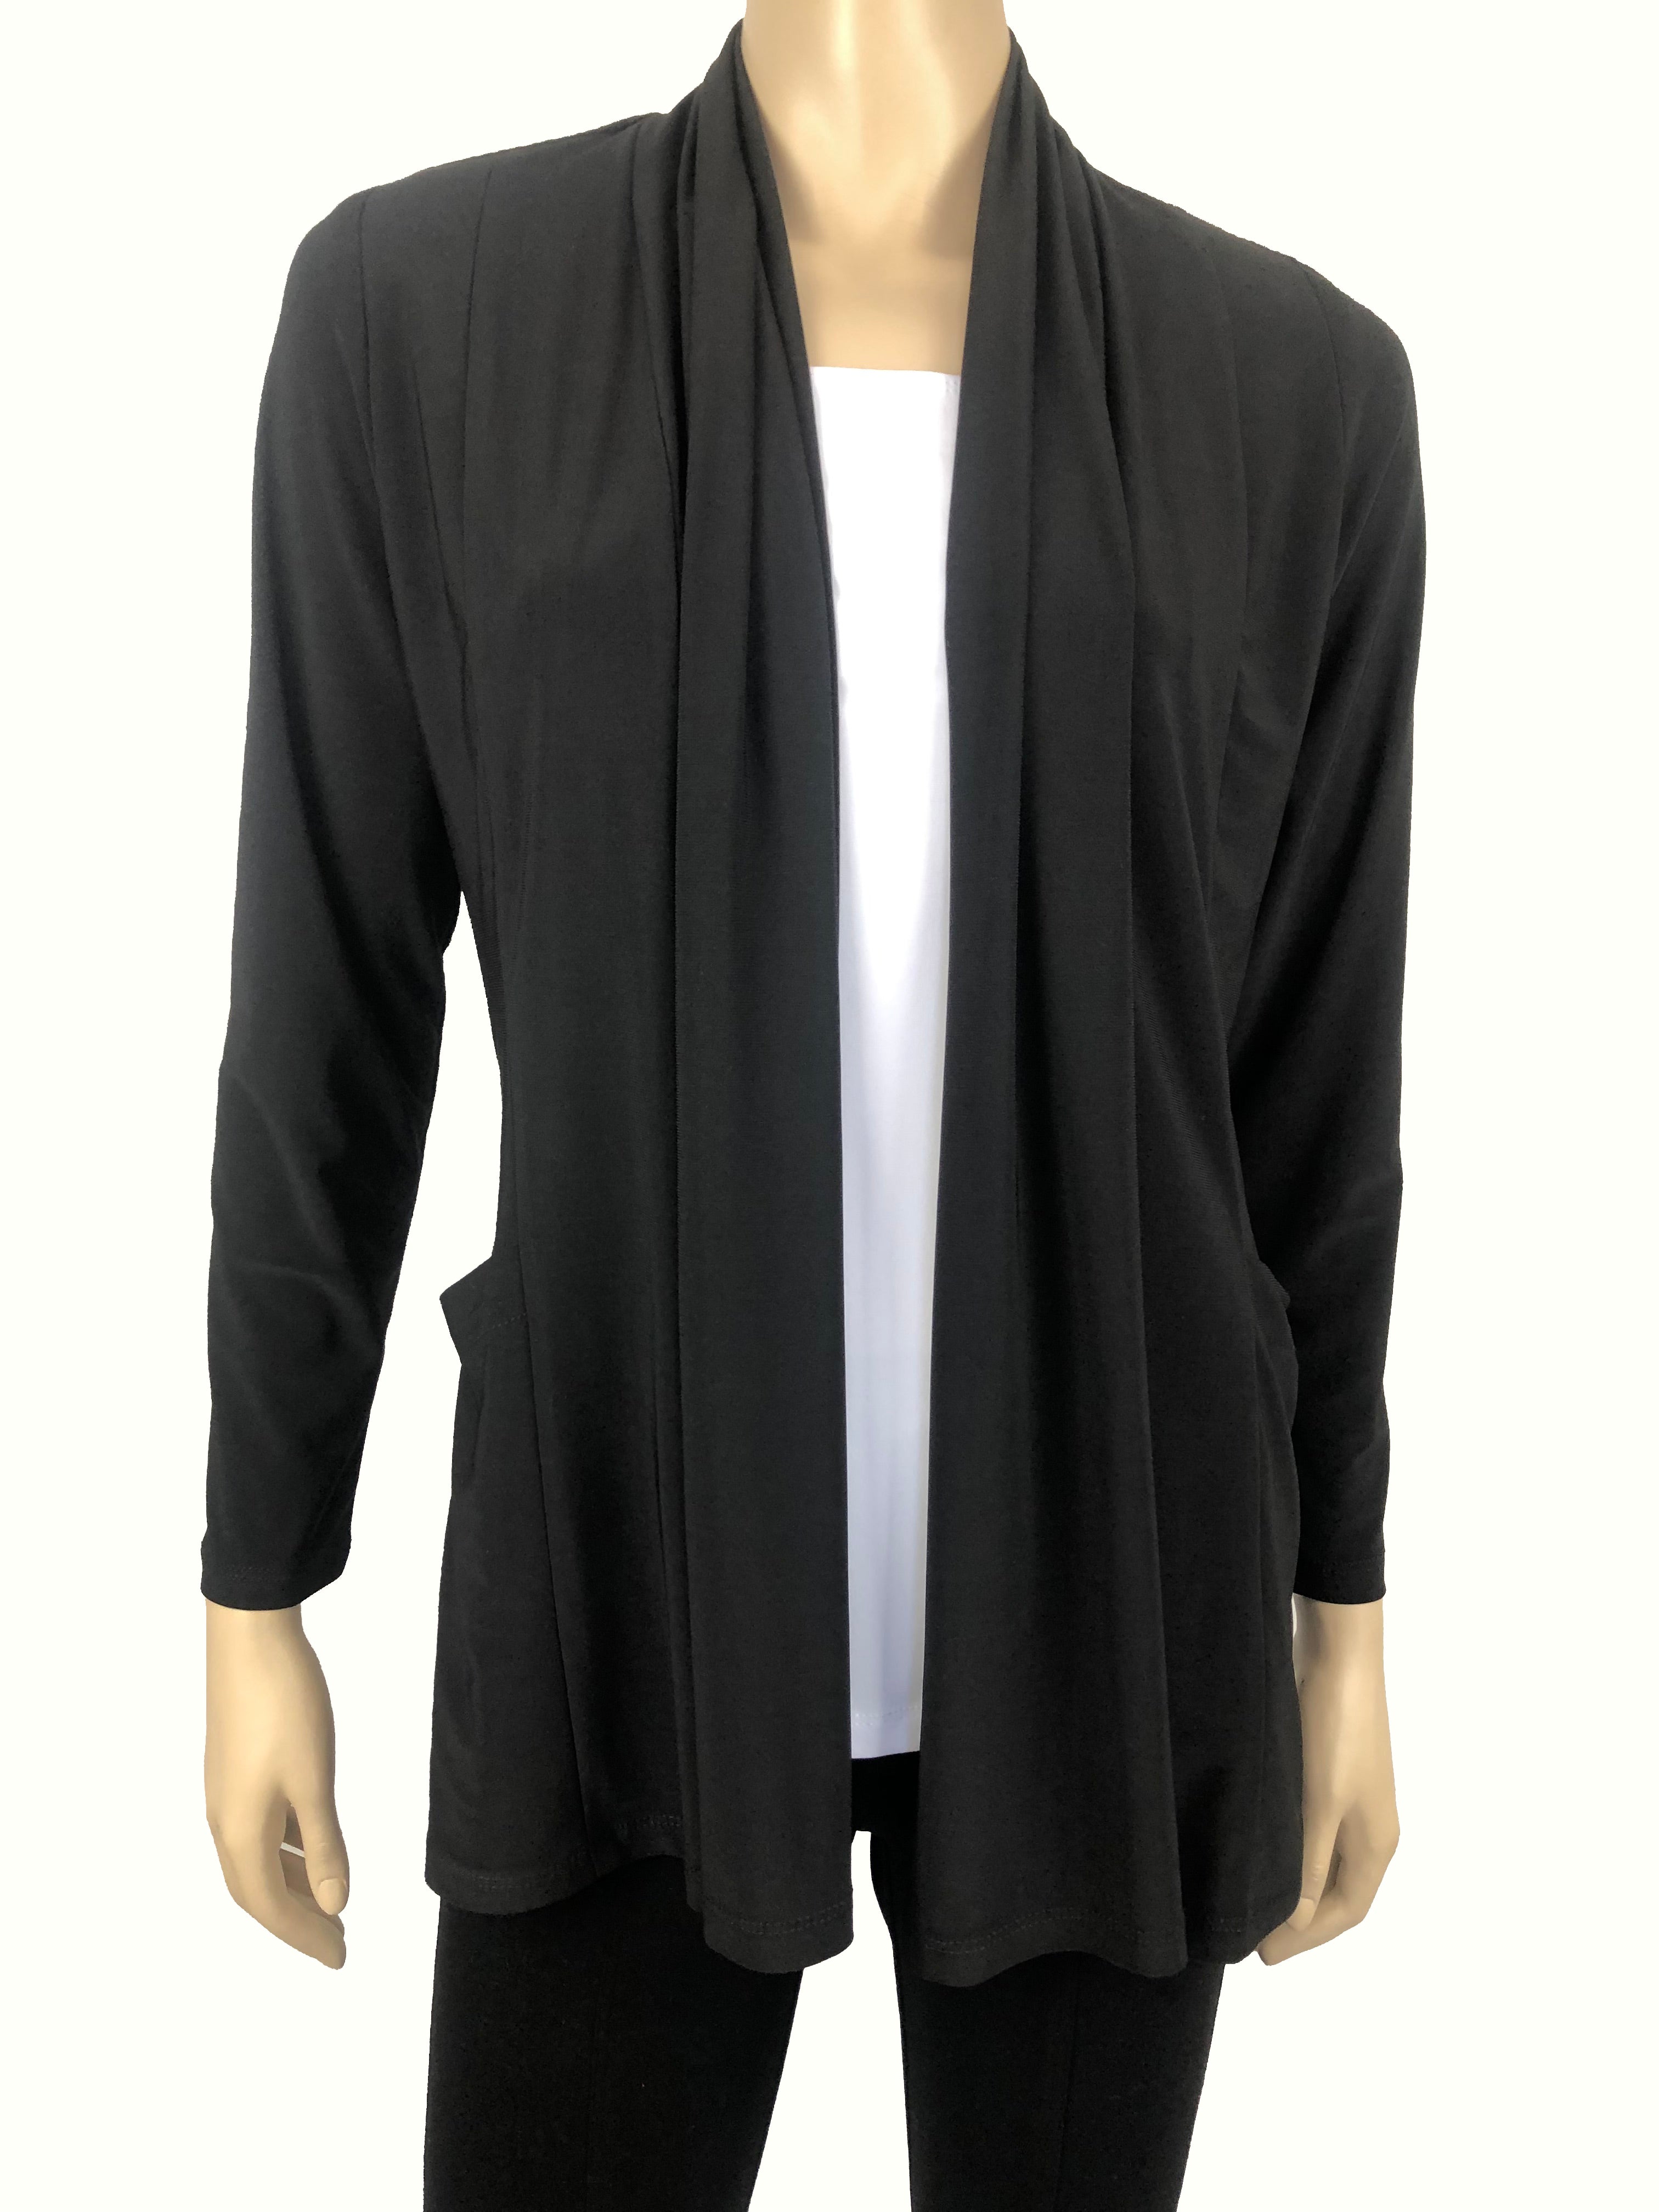 Women's Cardigan Black Soft Stretch Fabric Non Crease For Travel Features Side Pockets Best Selling Design Made in Montreal Canada On Sale NOW - Yvonne Marie - Yvonne Marie